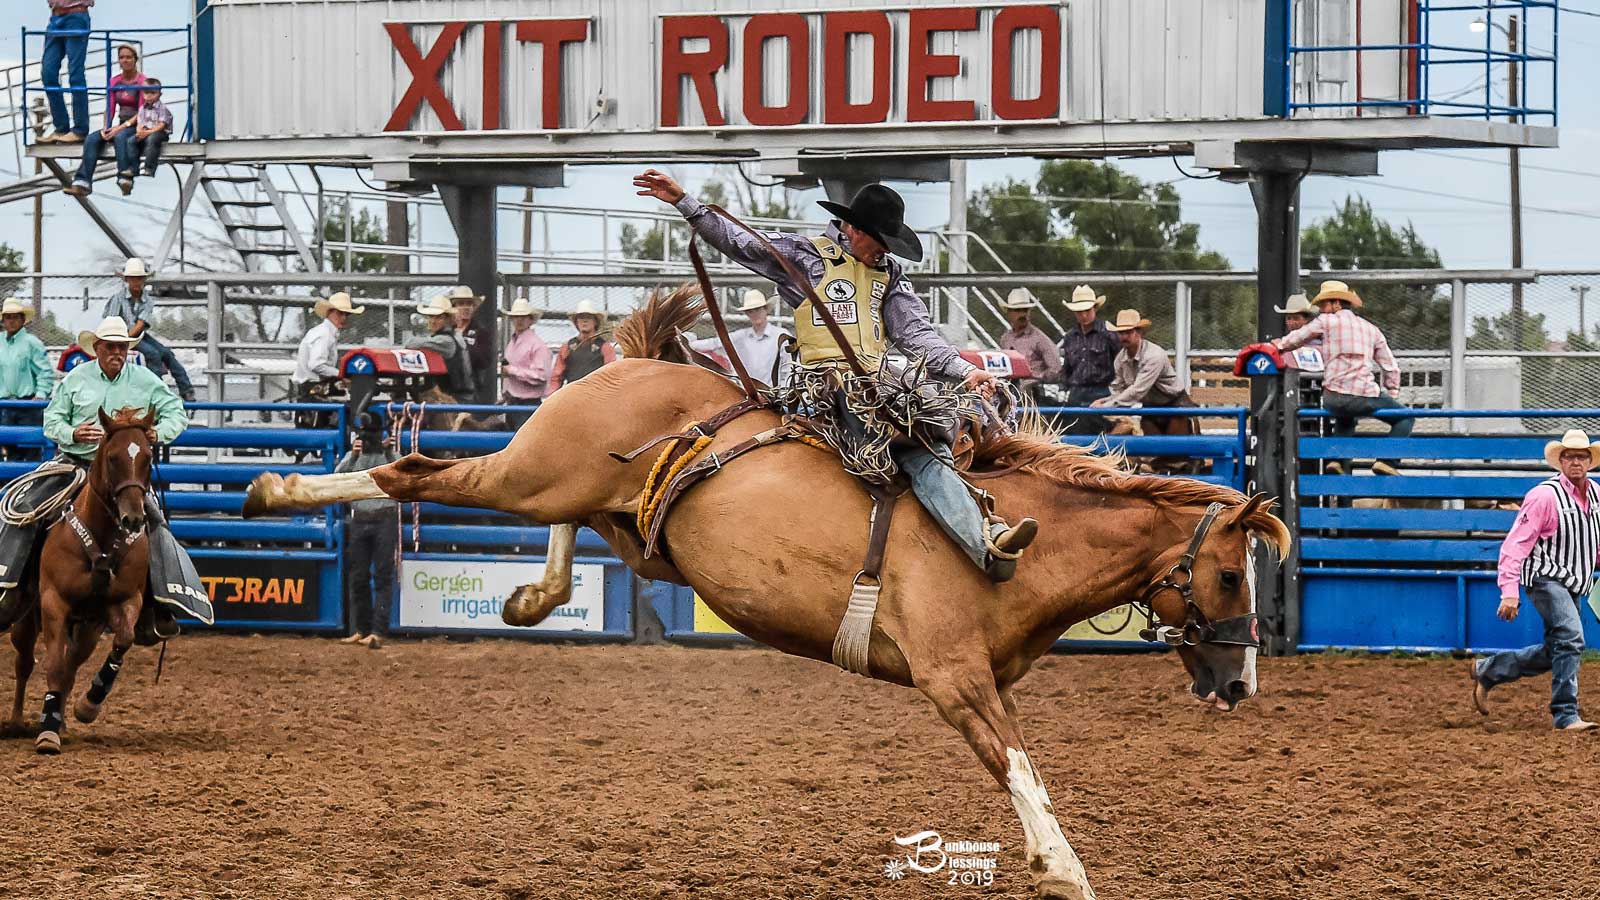 EVENTS TICKETS XIT RODEO AND REUNION